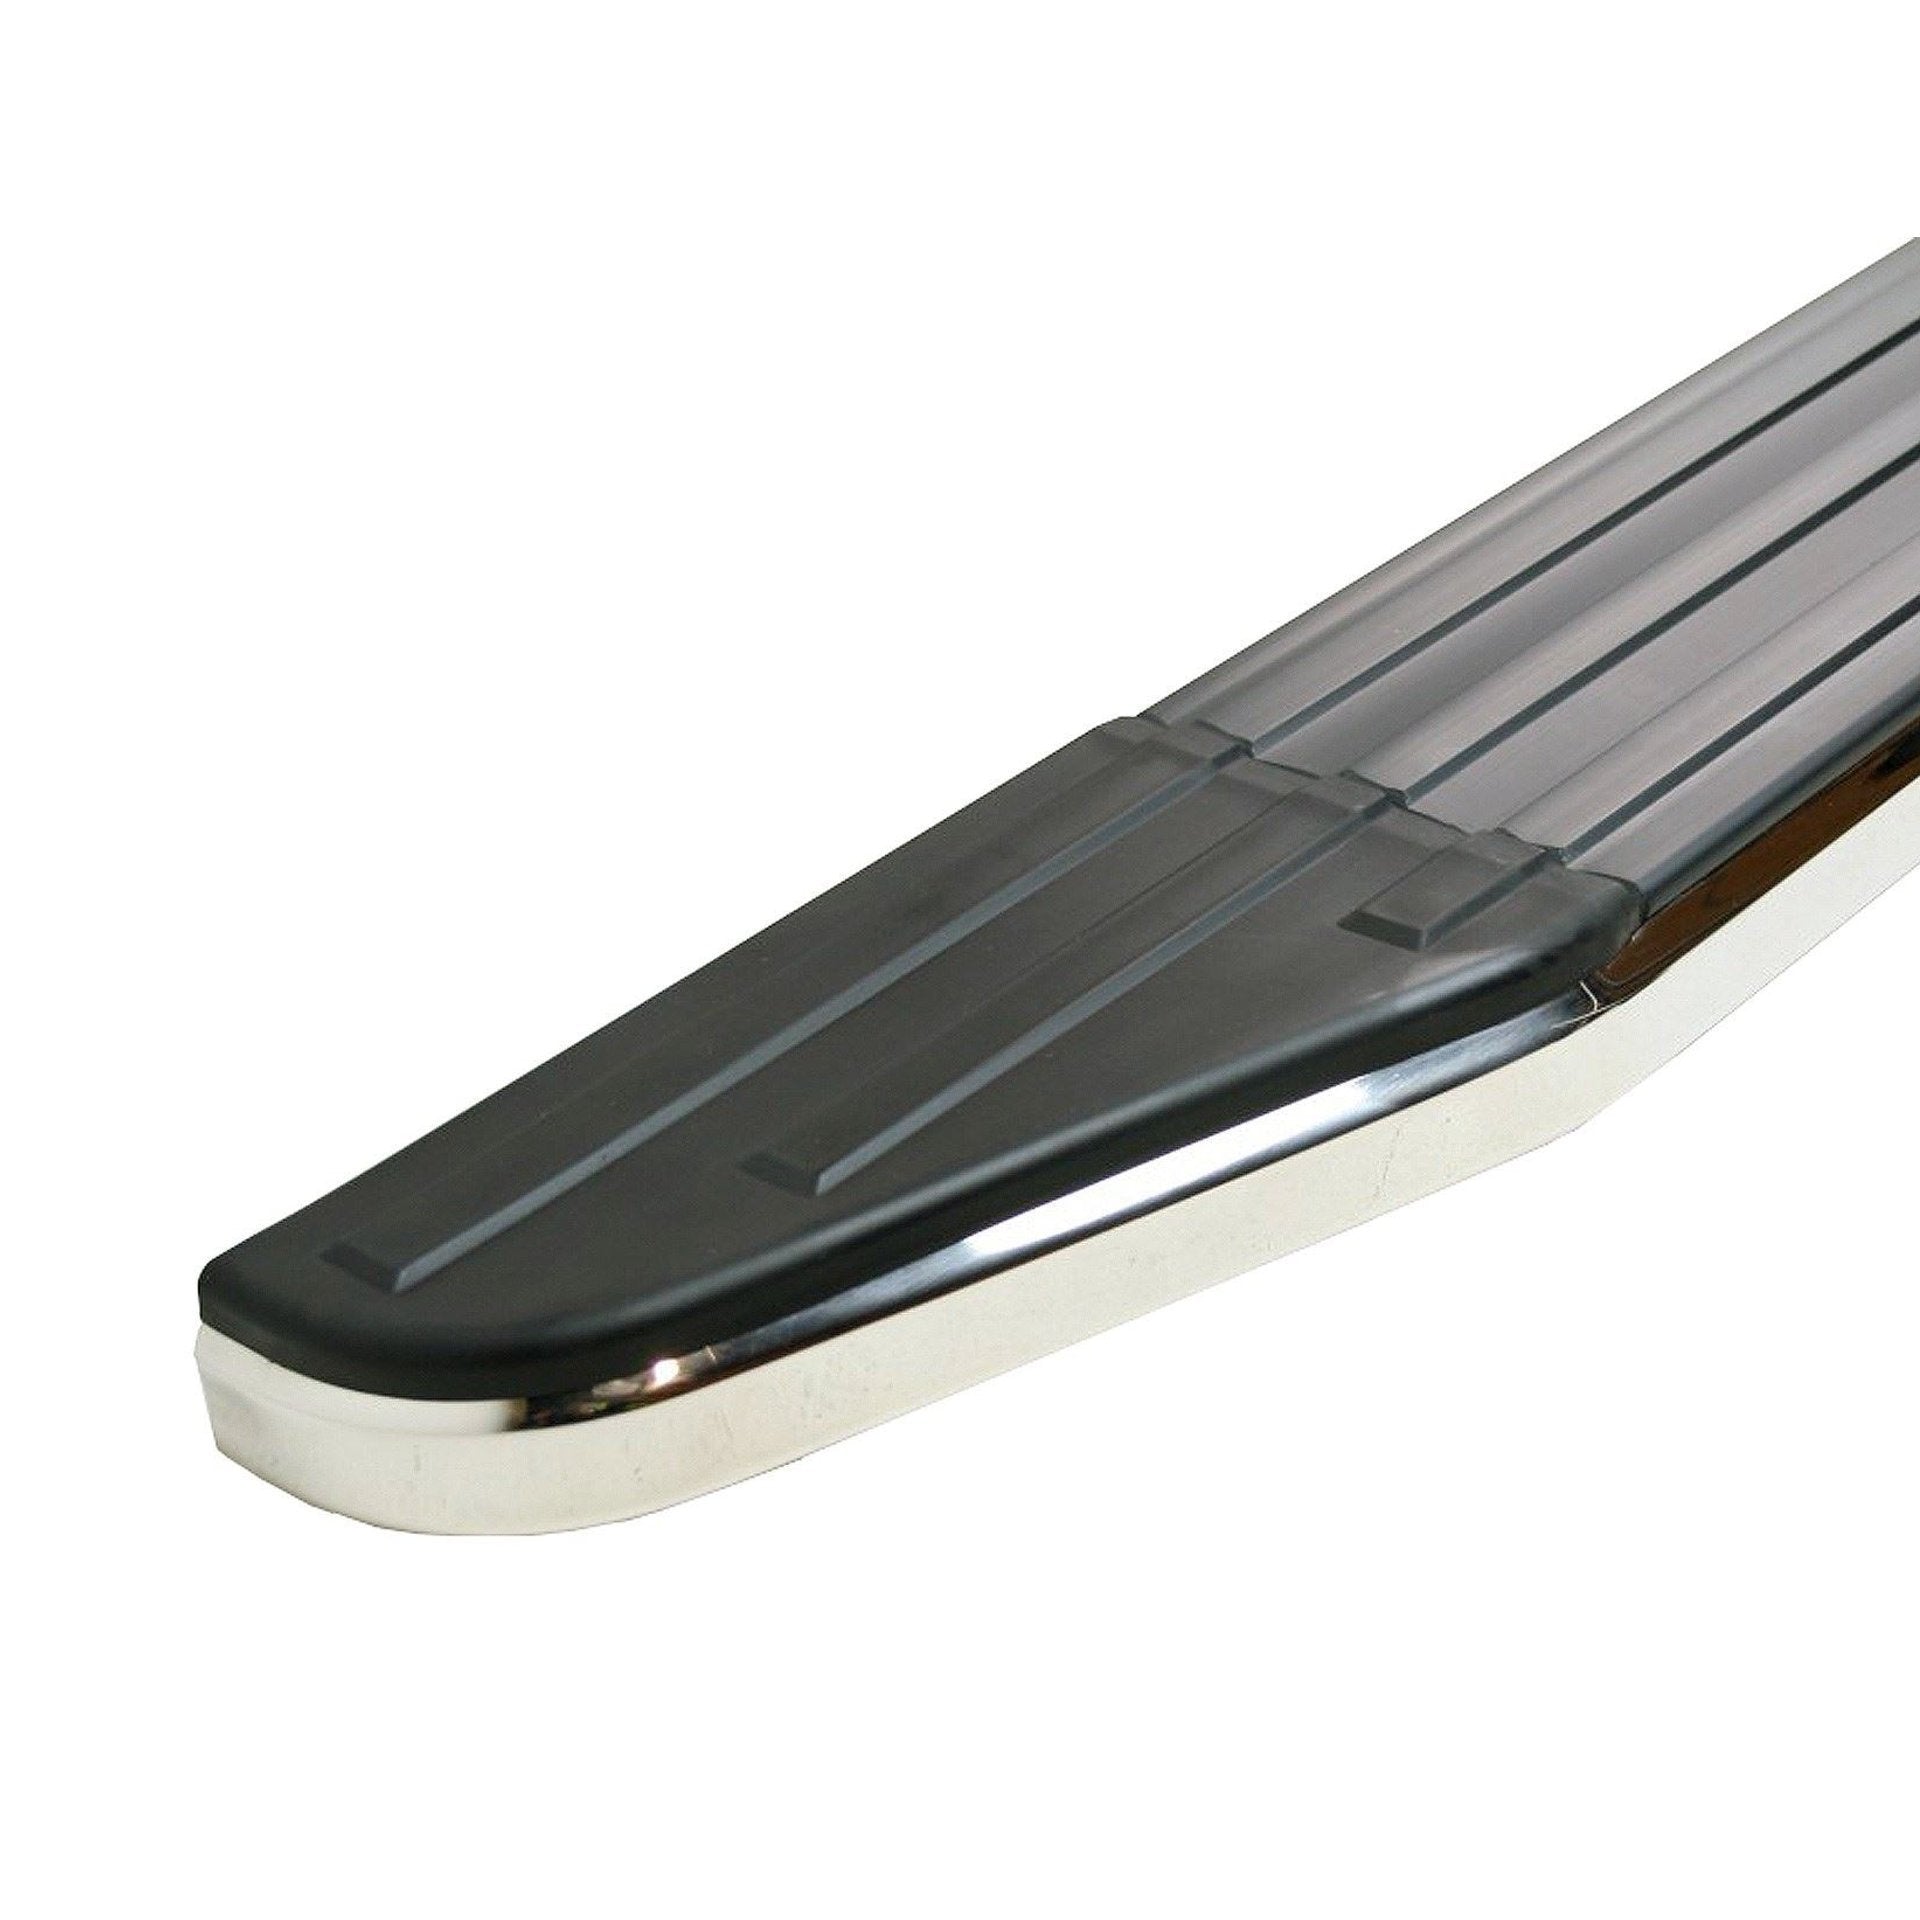 Raptor Side Steps Running Boards for Range Rover Evoque Dynamic/HSE 11-18 -  - sold by Direct4x4